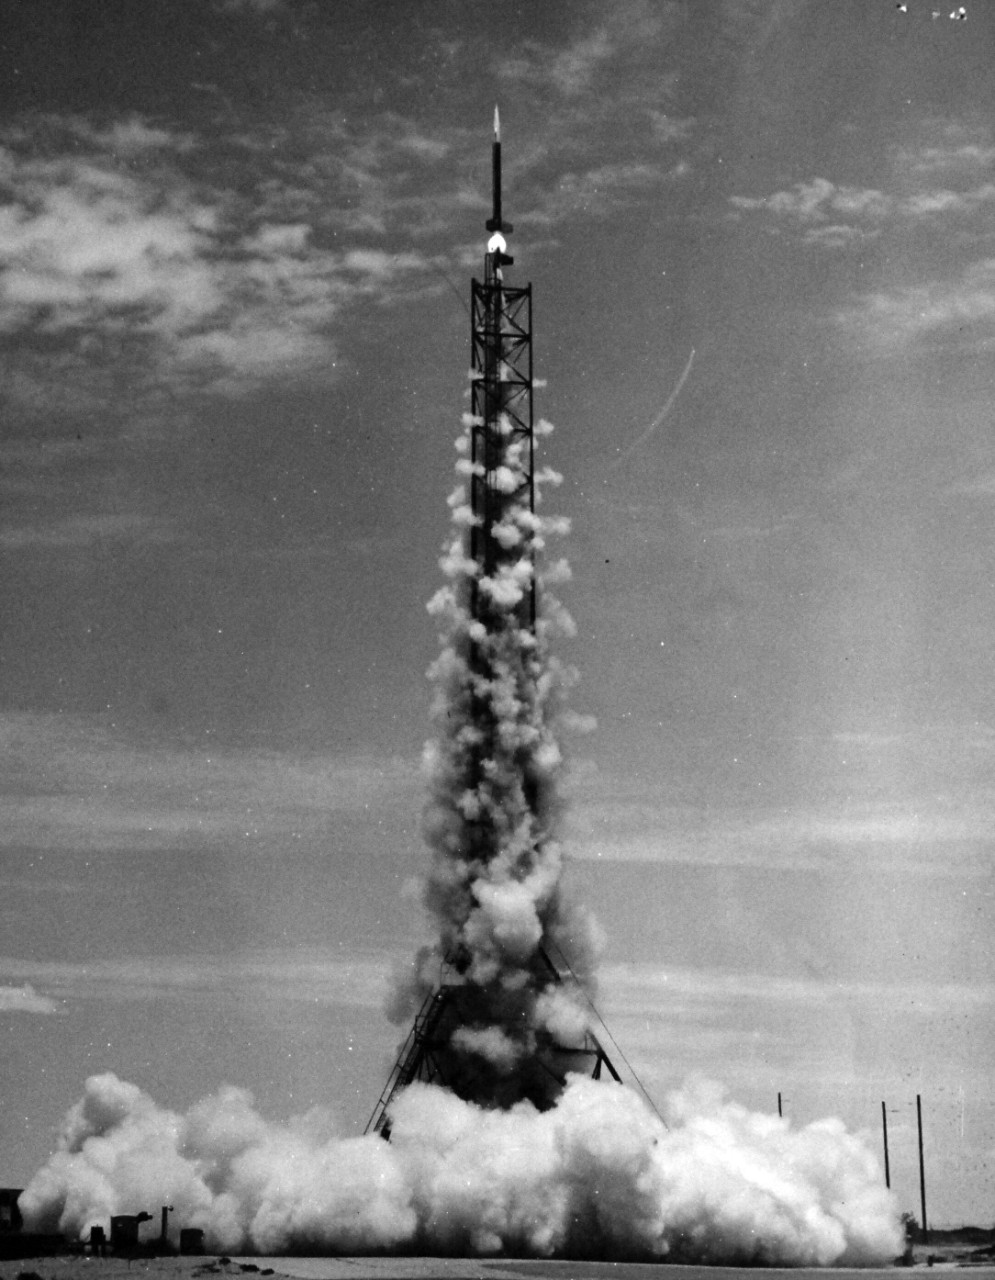 330-PS-7909 (USN 709626):   The Navy Research Rocket, Aerobee Hi, is fired from its launchers at U.S. Naval Ordnance Missile Test Facility, White Sands Proving Ground, New Mexico, the Aerobee Hi carried 135 pounds of radio devices 163 miles above the Earth, June 29, 1956, to set a new altitude record for an American-built “boosted” rocket.  Less than a minute after take-off, the pencil-slim 23-foot rocket had attained a maximum speed of 4435 miles per hour.  The primary experiment performed with this research rocket was the measurement of various physical characteristics of the Ionosphere, that part of the Earth’s atmosphere at an altitude of 35 miles.  Photograph released July 3, 1956.  Official U.S. Navy Photograph, now in the collections of the National Archives.  